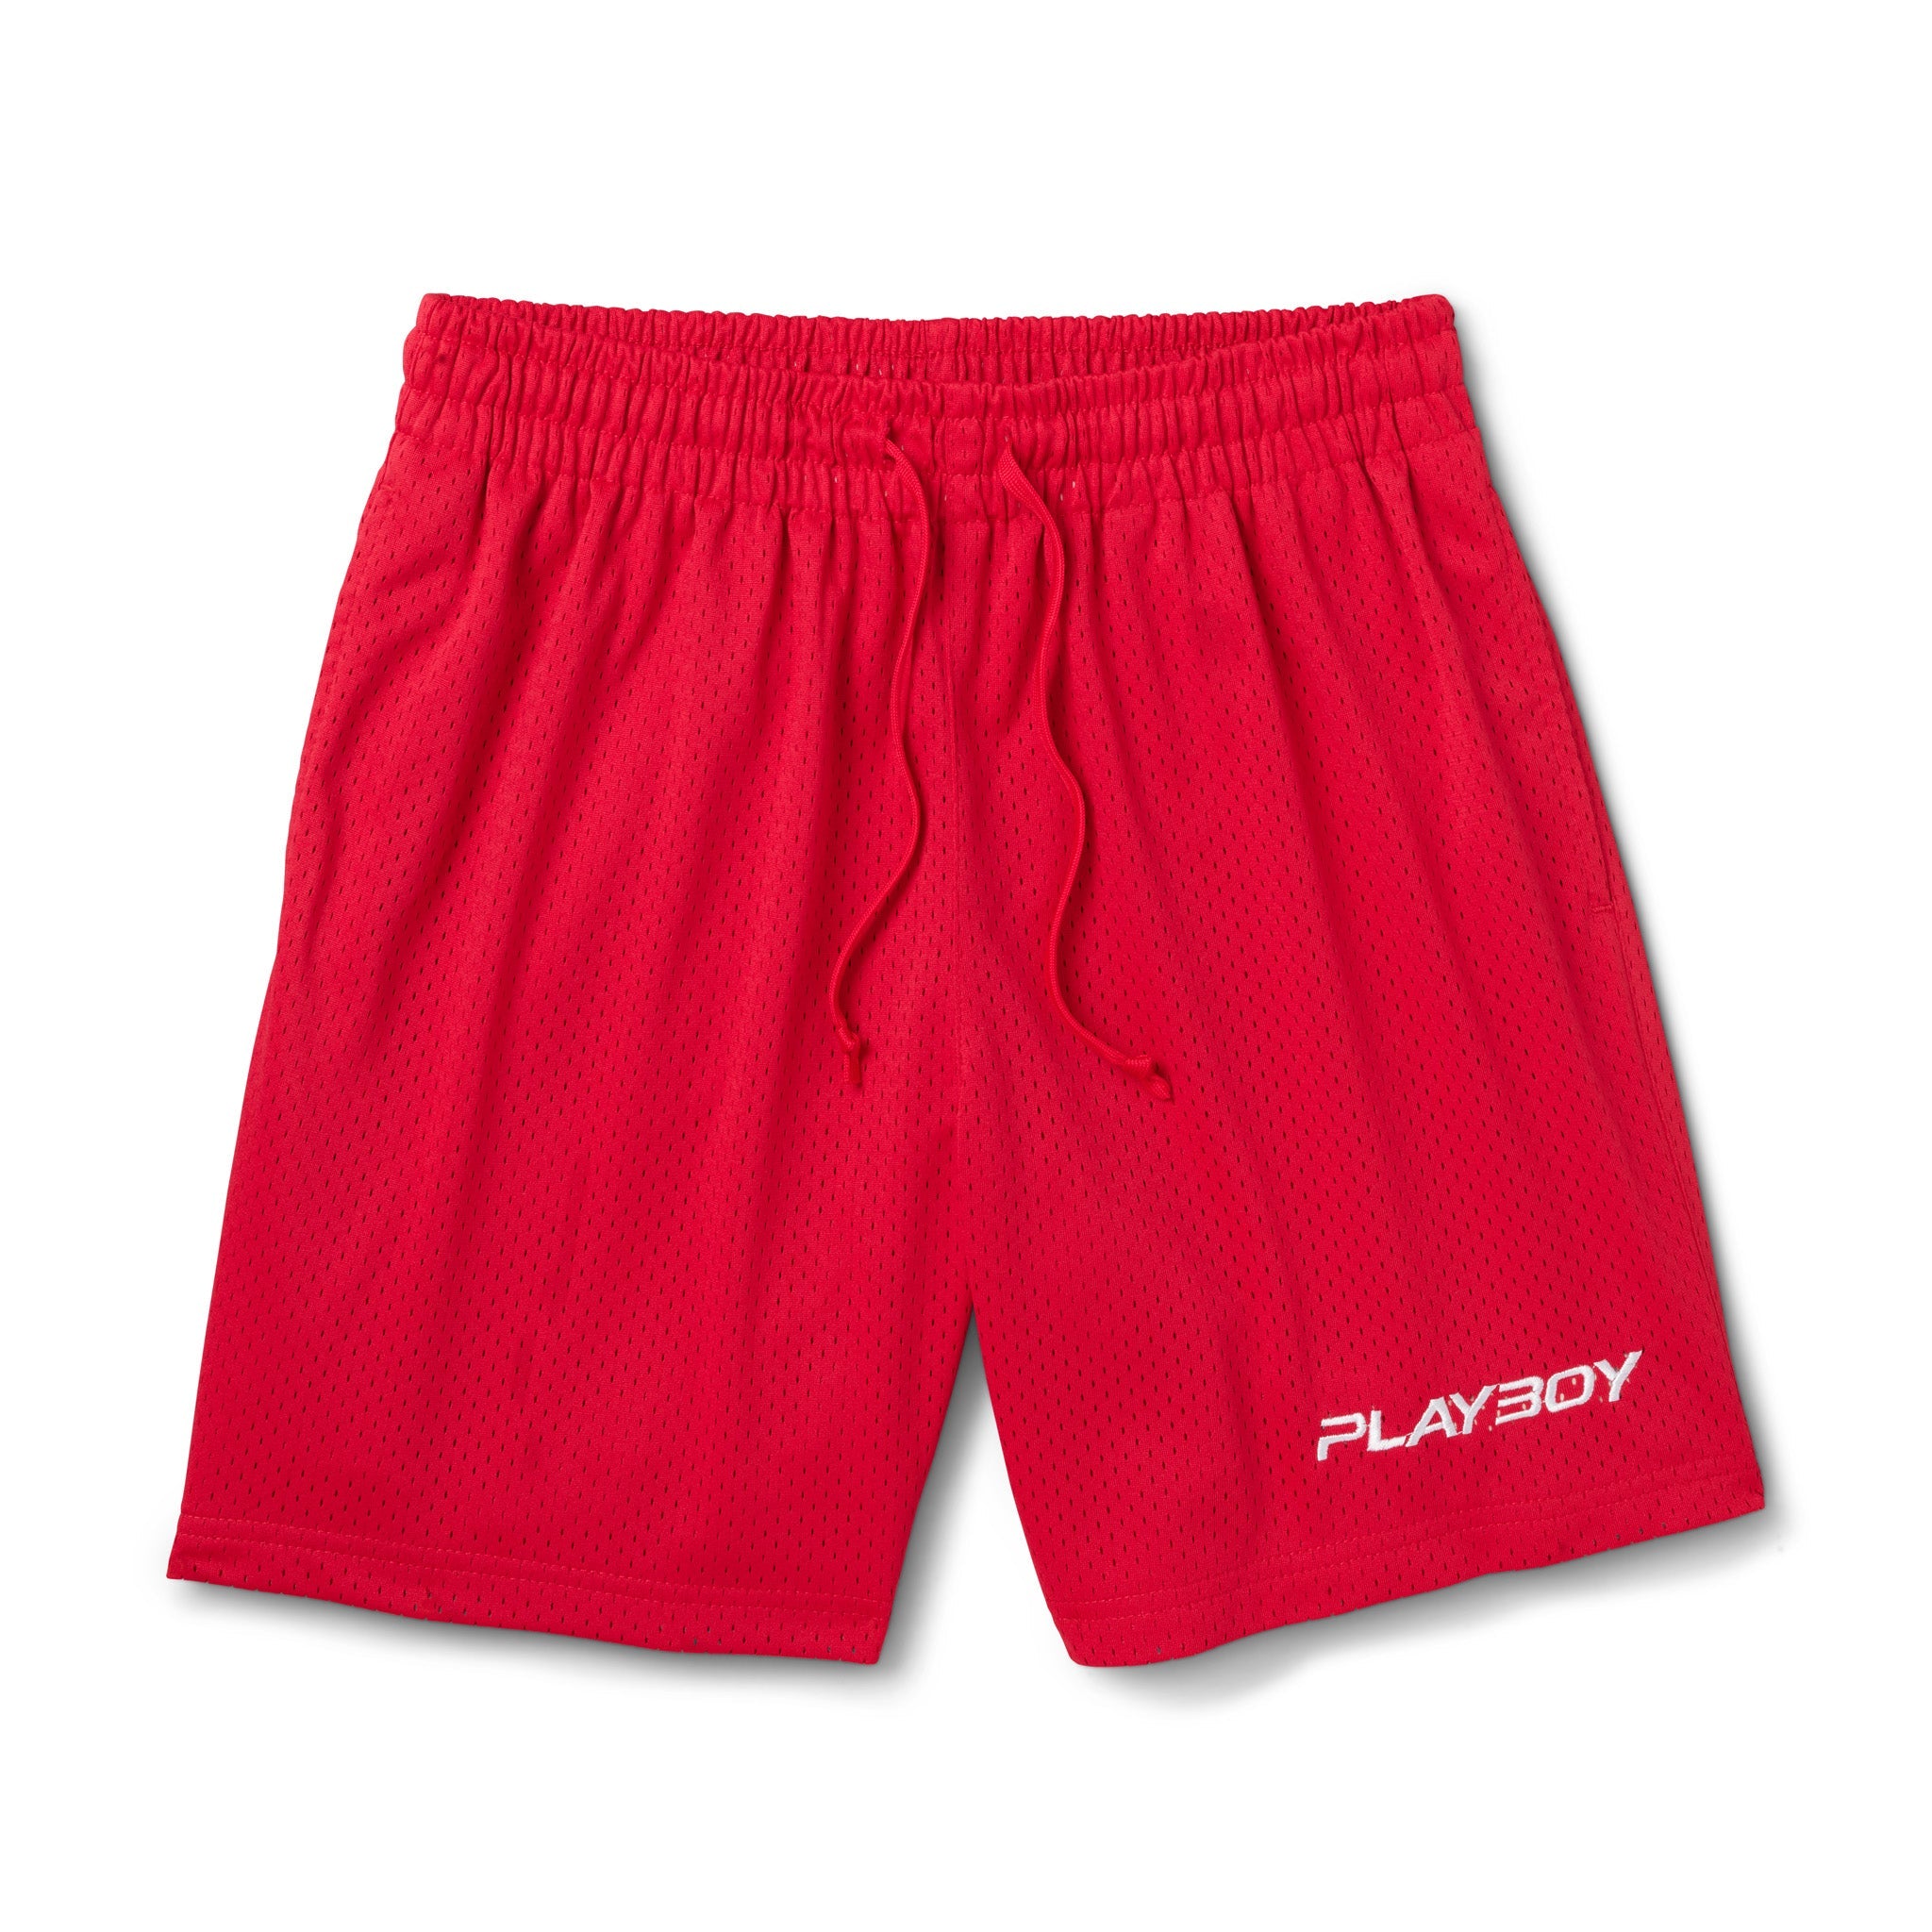 Red Basketball Shorts: Thrilling Playboy Classic Design